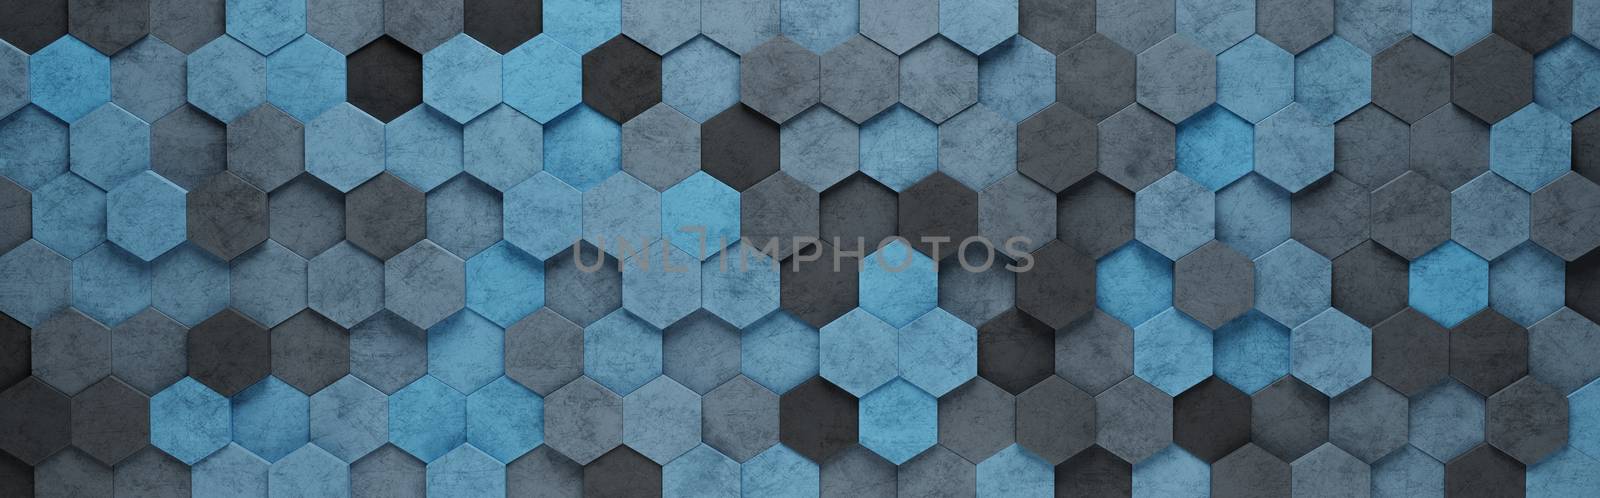 Blue Hexagon Tiles 3D Pattern Background by make